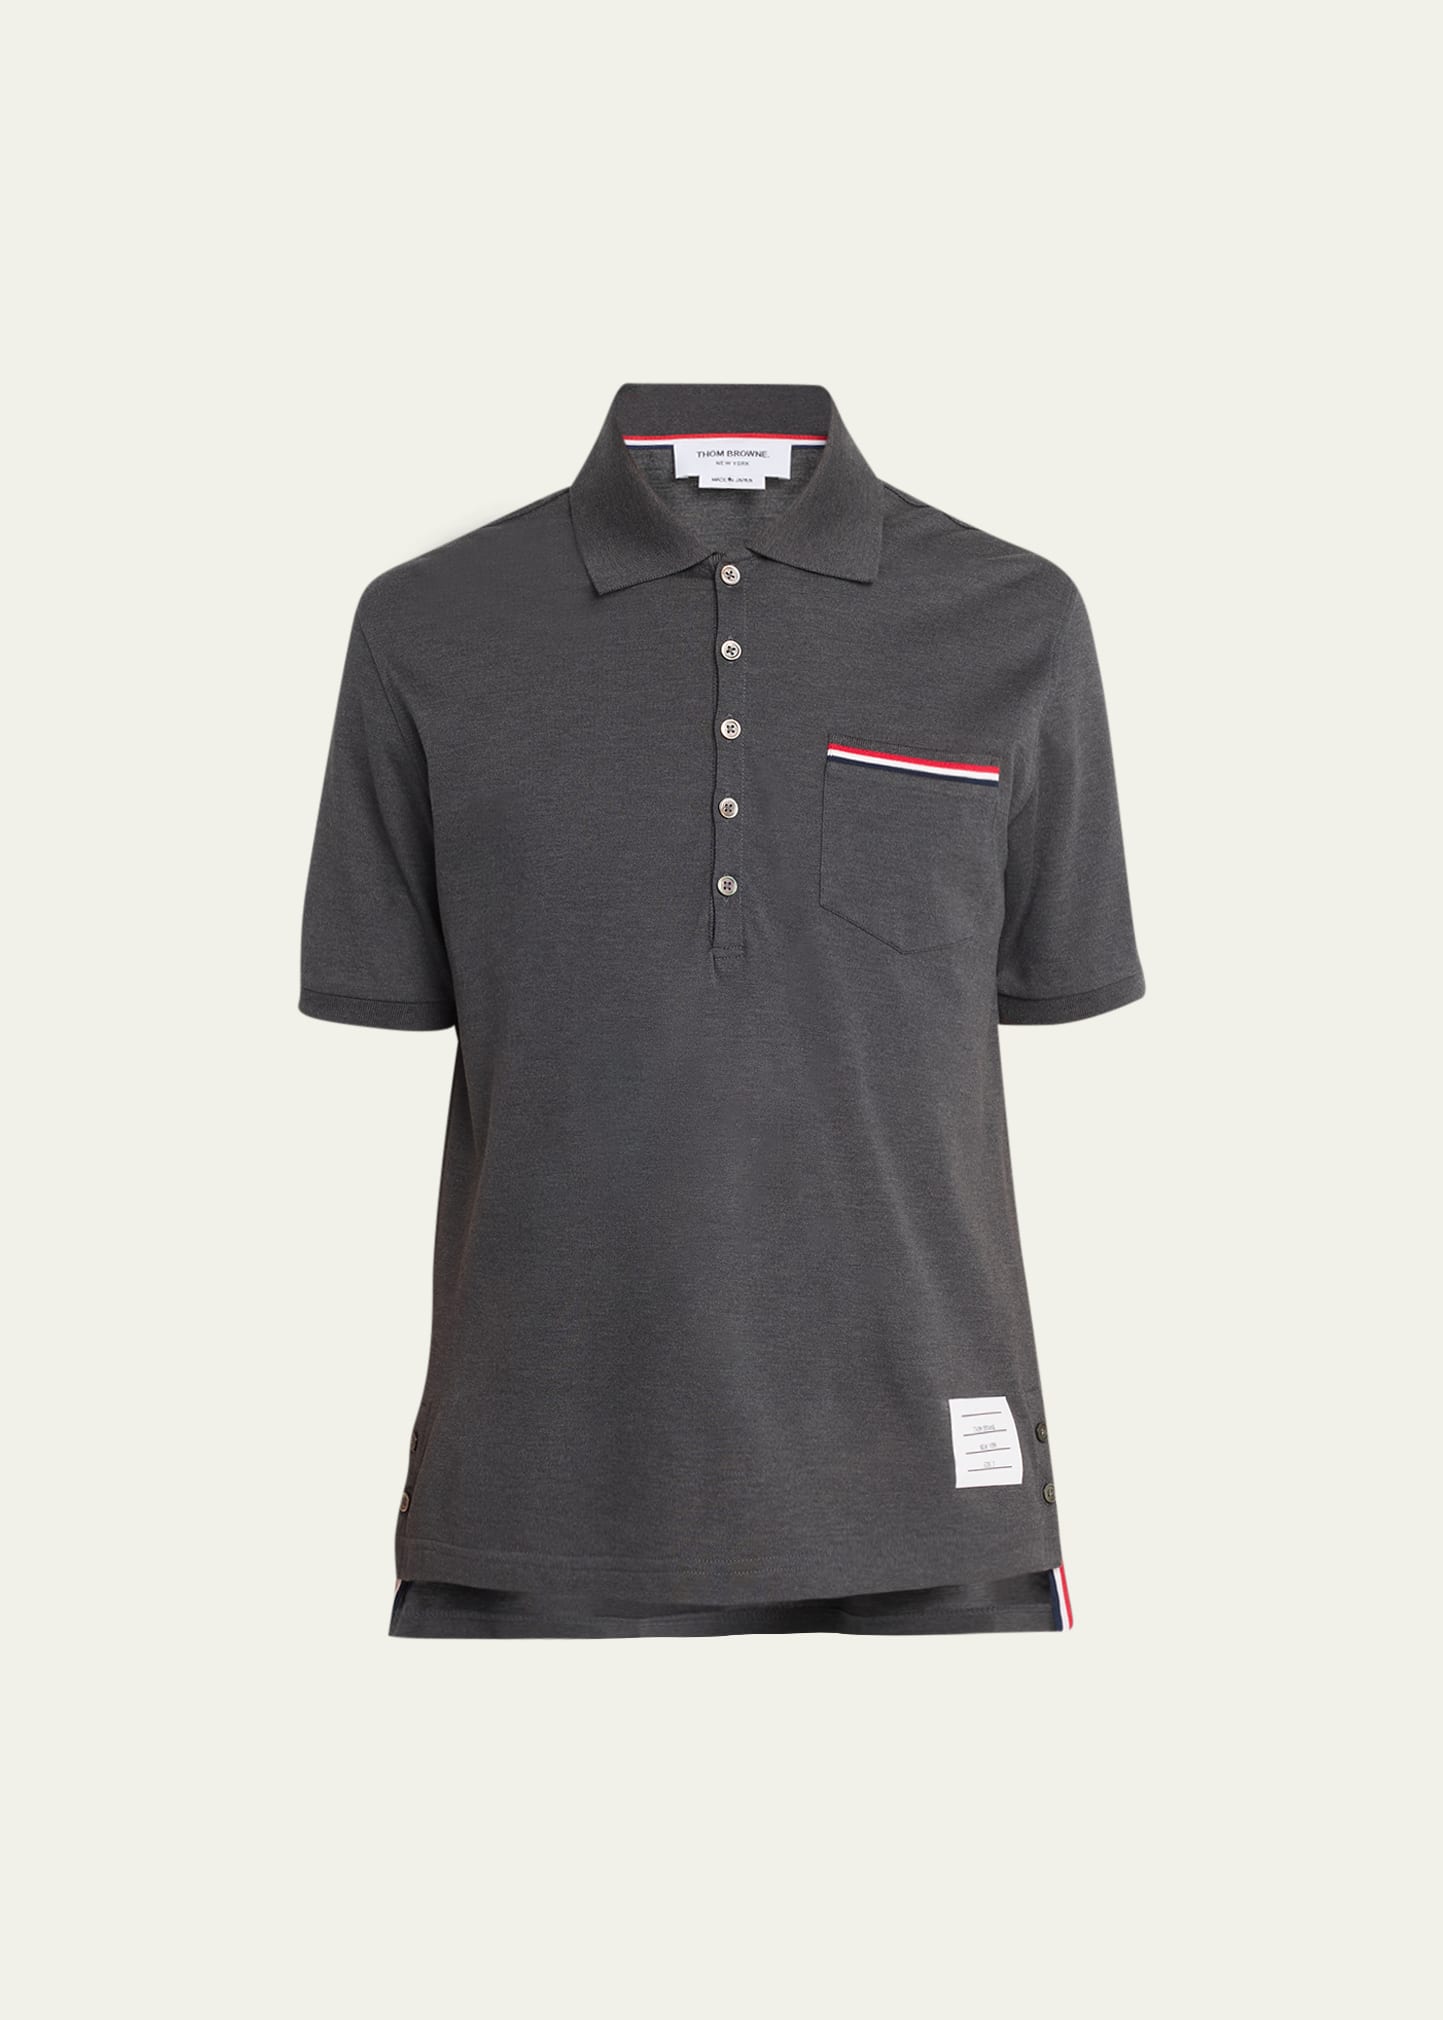 Thom Browne Heather Polo Shirt With Striped Pocket In Dark Gray